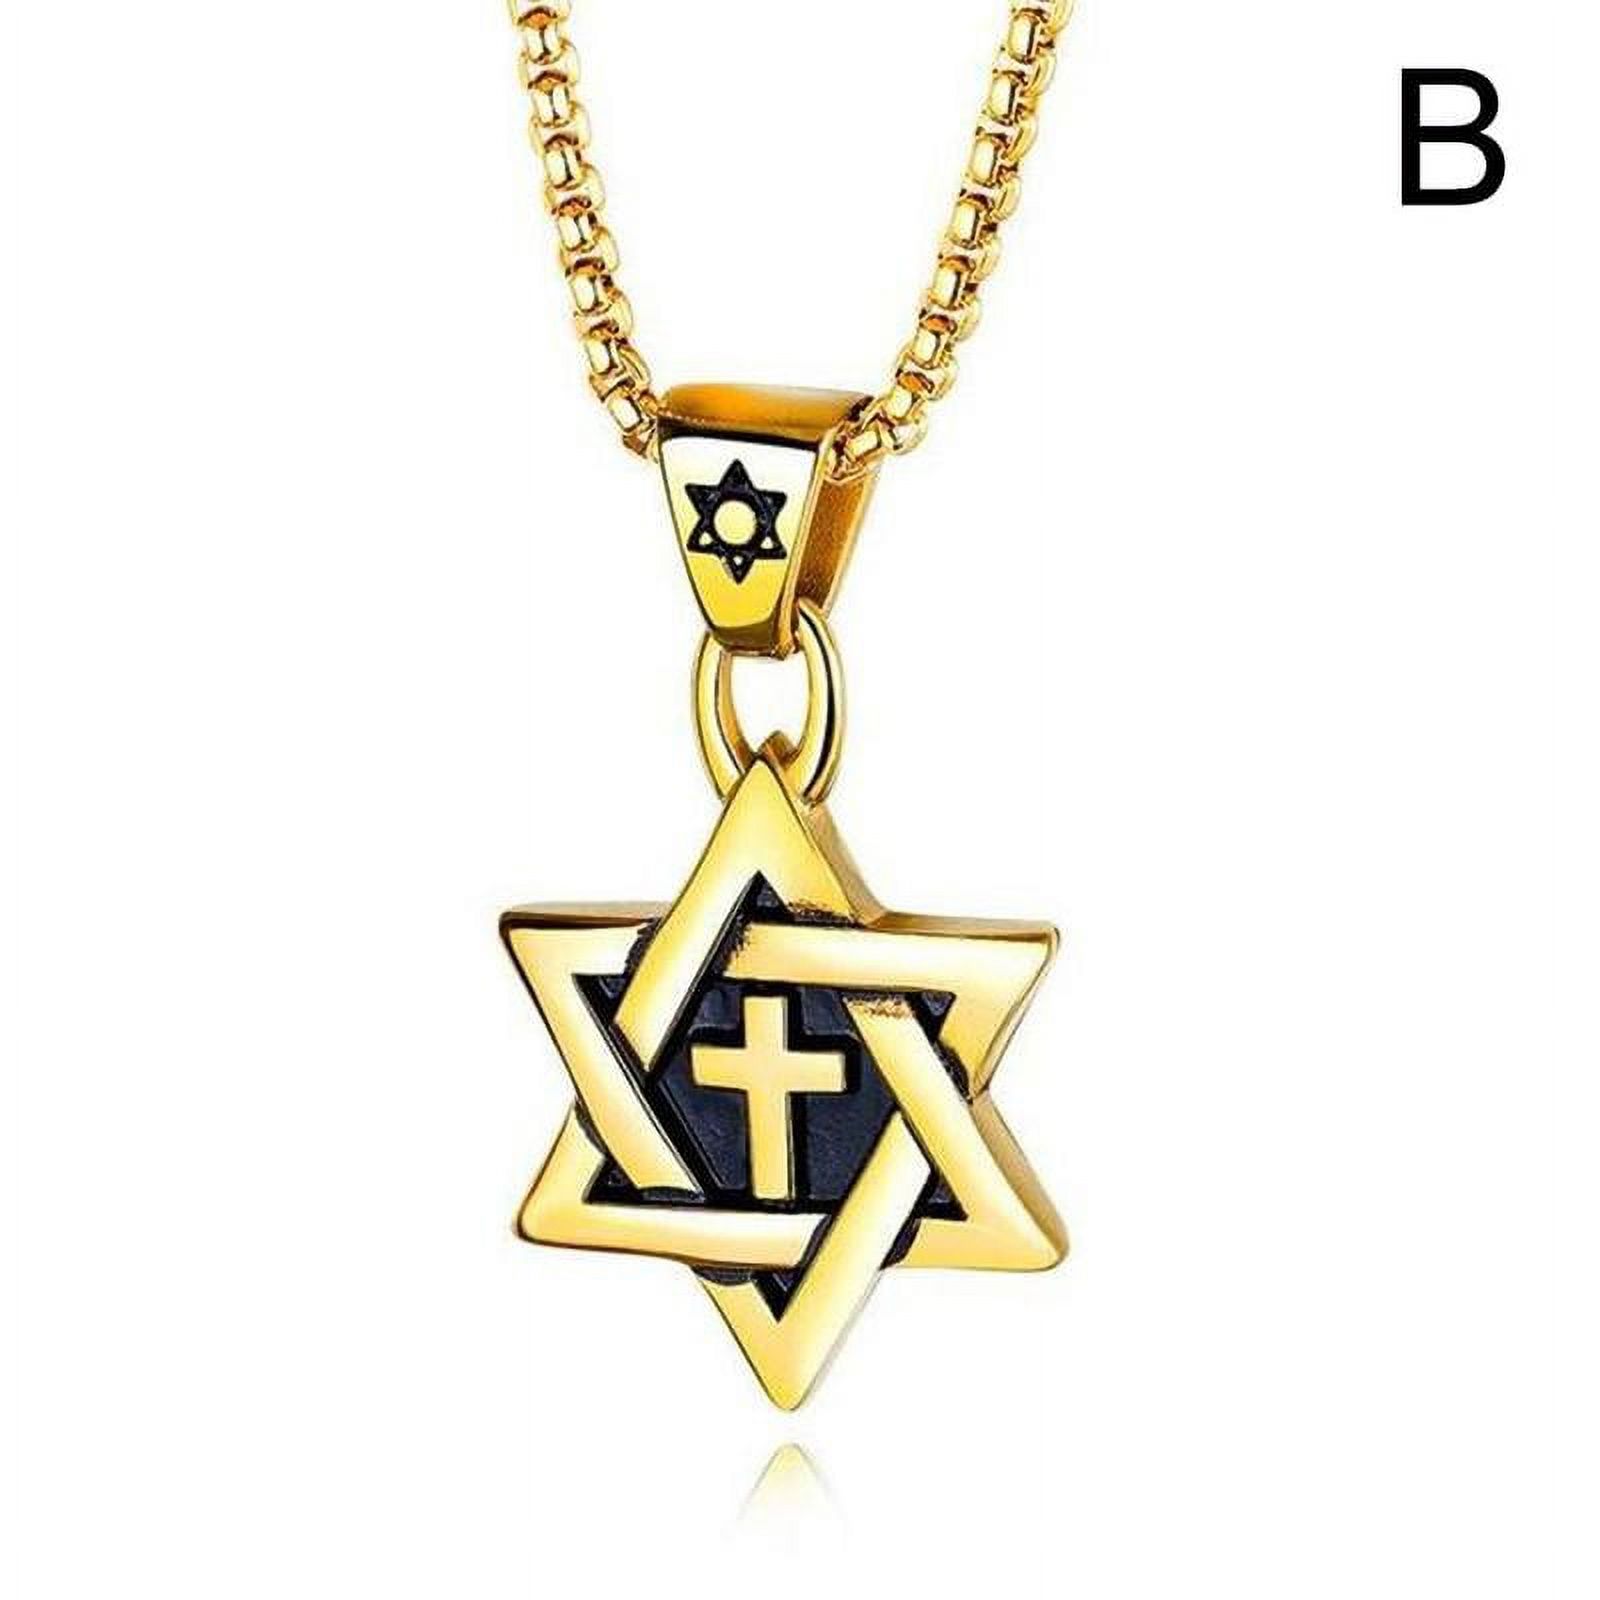 Stainless Steel Star Cross Pendant & Necklace Gold Color Women/Men Chain Israel Jewish Jewelry For Men - image 1 of 9